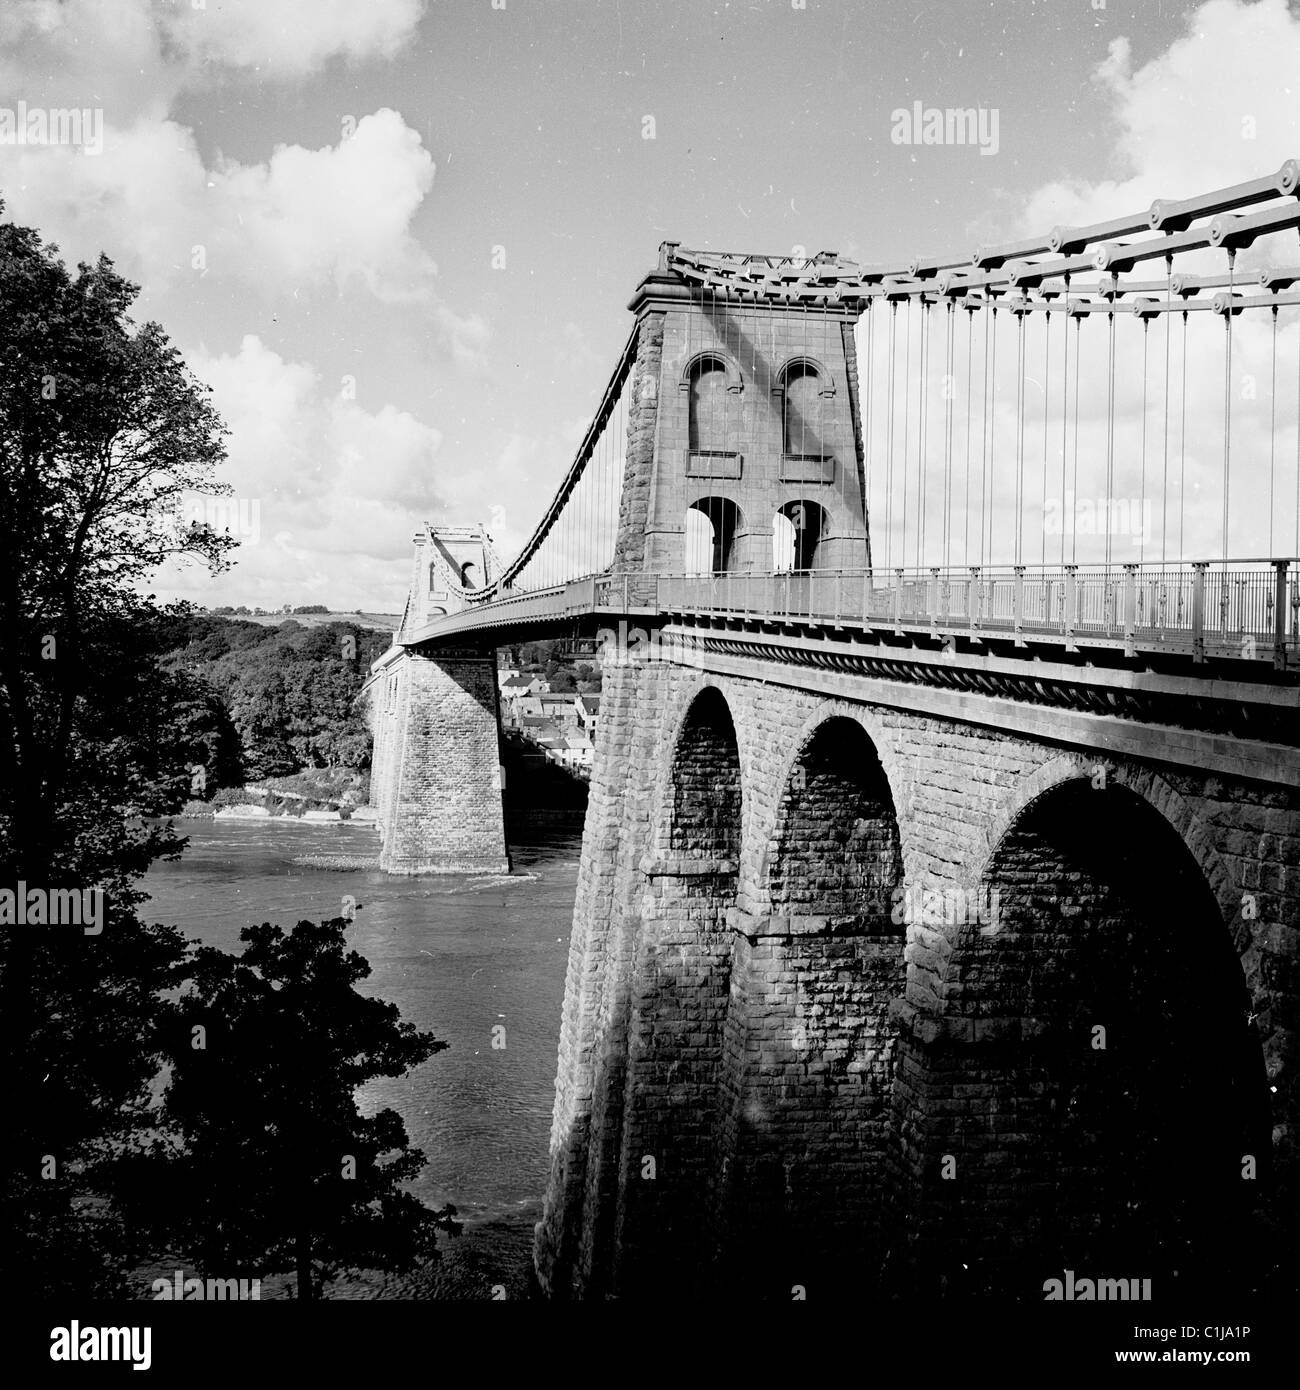 1960s, historical, the Menai Suspension Bridge, Wales, designed by Thomas Telford and the world's first major suspension bridge, opened in 1826. Stock Photo